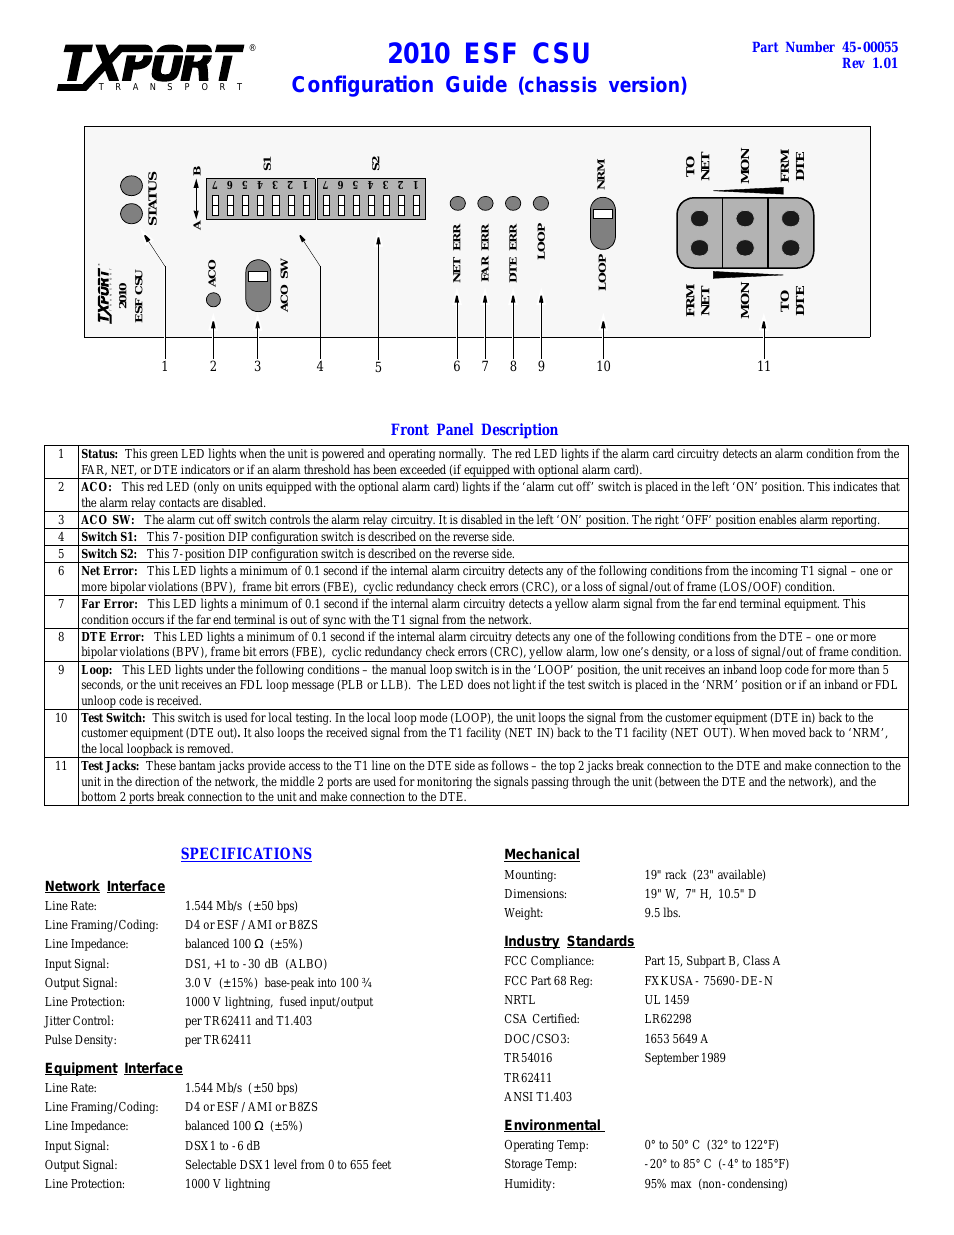 2010 Chassis (CG) Configuration/Installation Guide